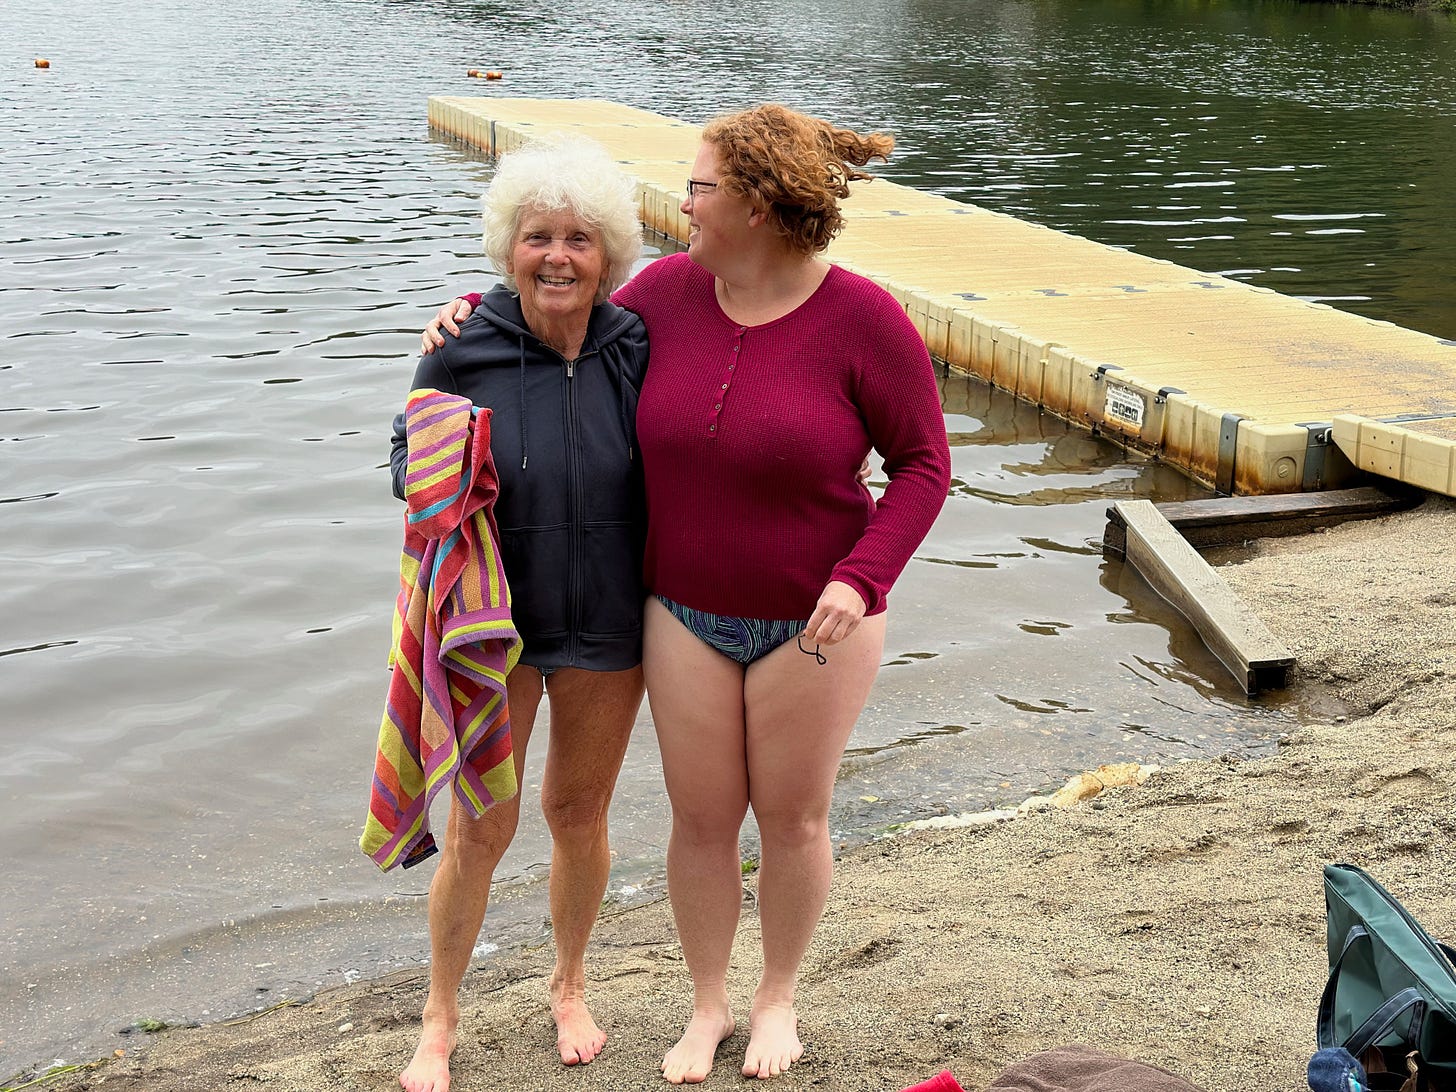 My mom and I standing at the edge of the lake with our arms around each other, the dock behind us.My mom is smiling at the camera, and I’m smiling at her.